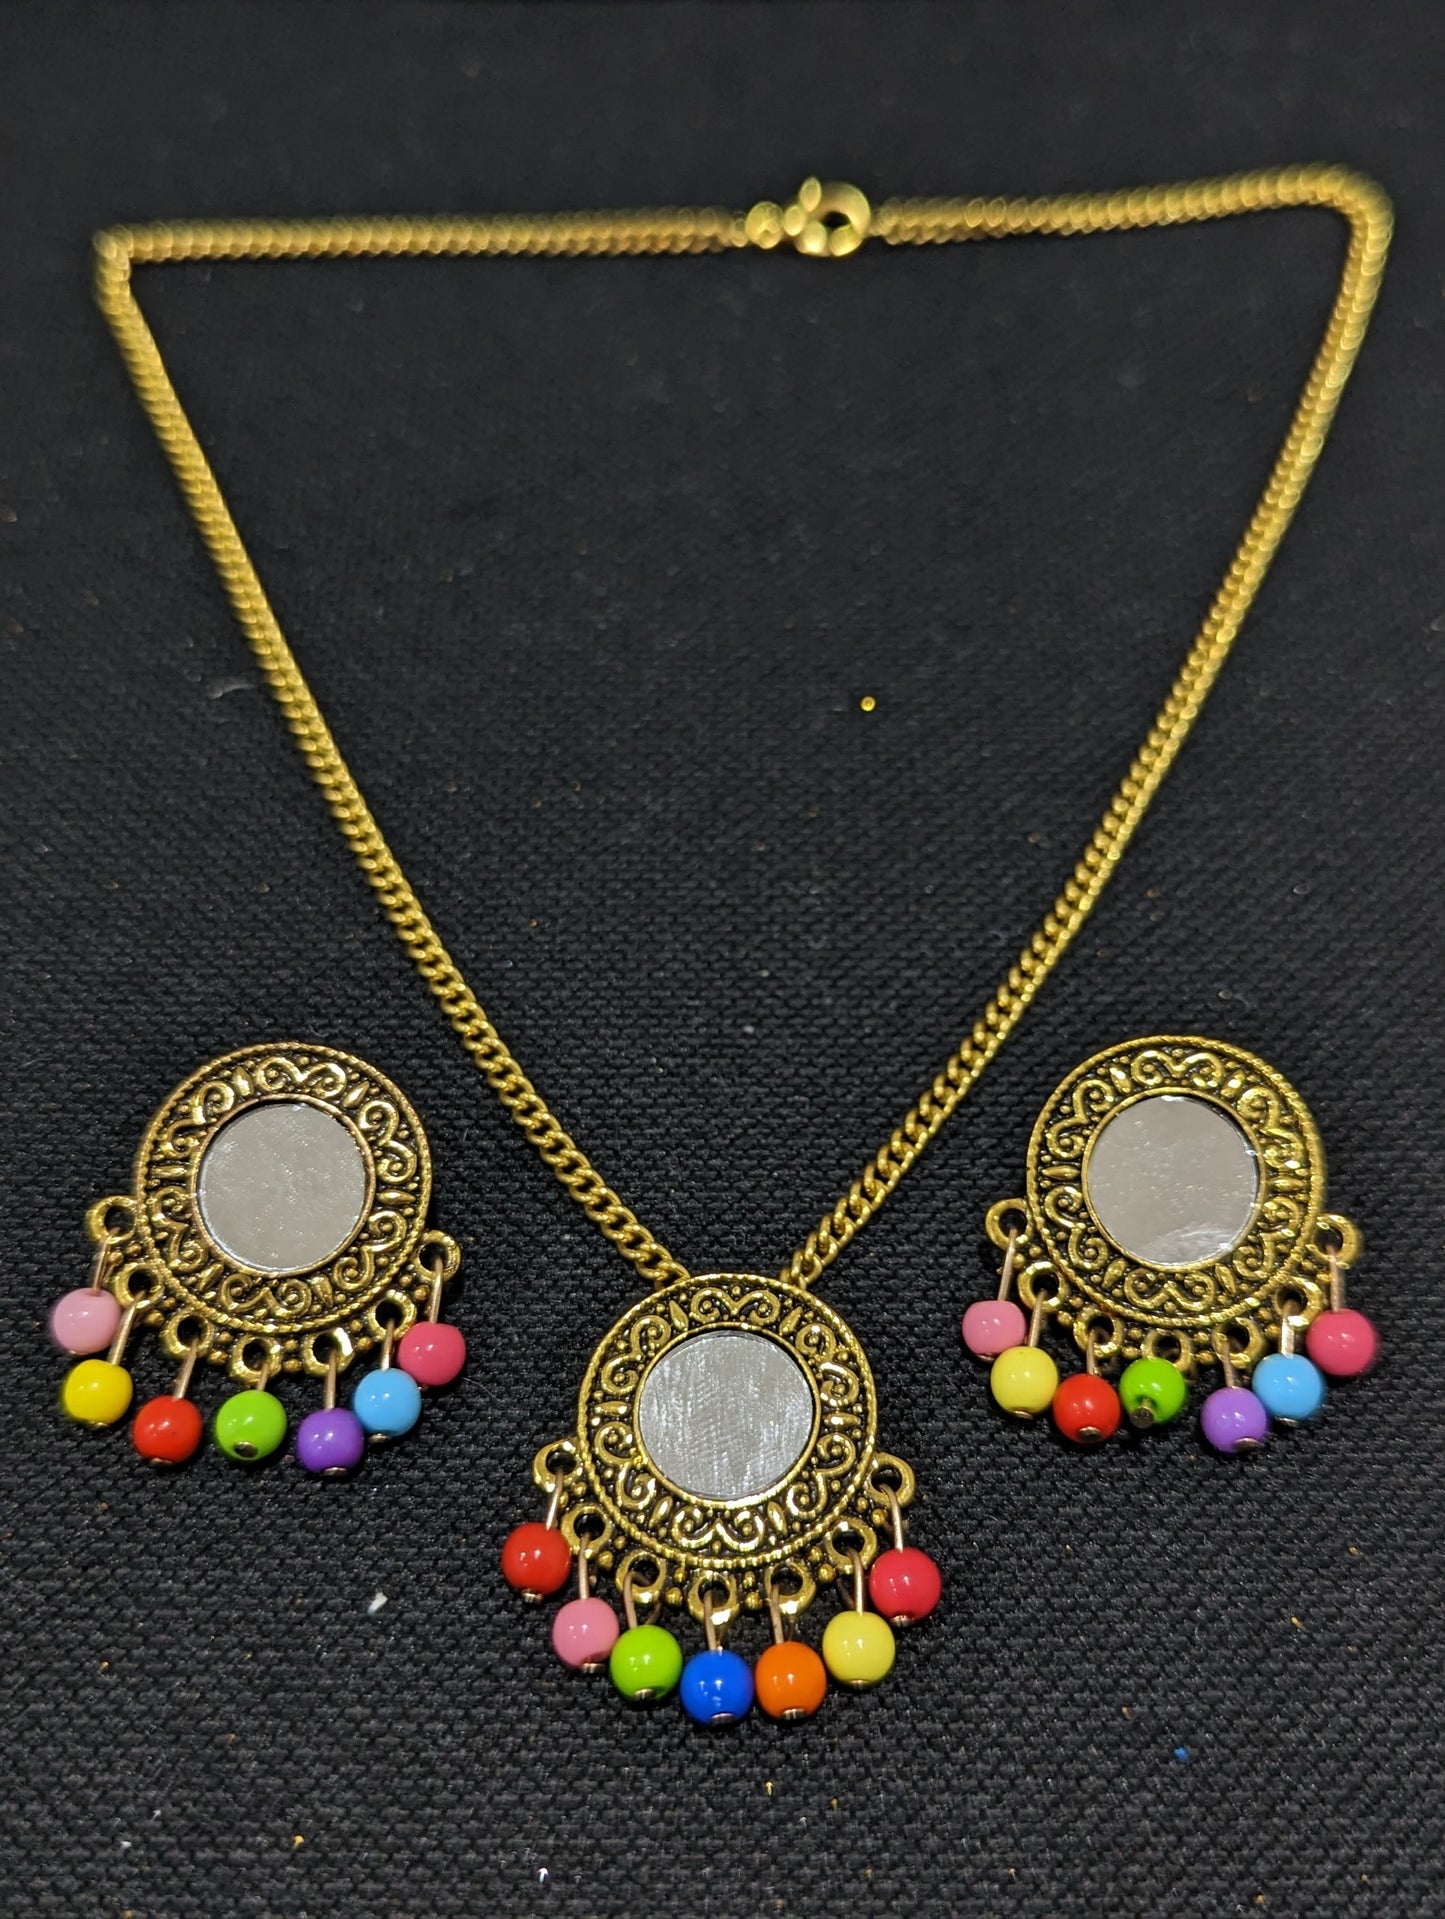 Antique gold mirror pendant chain necklace and earring set - Design 2